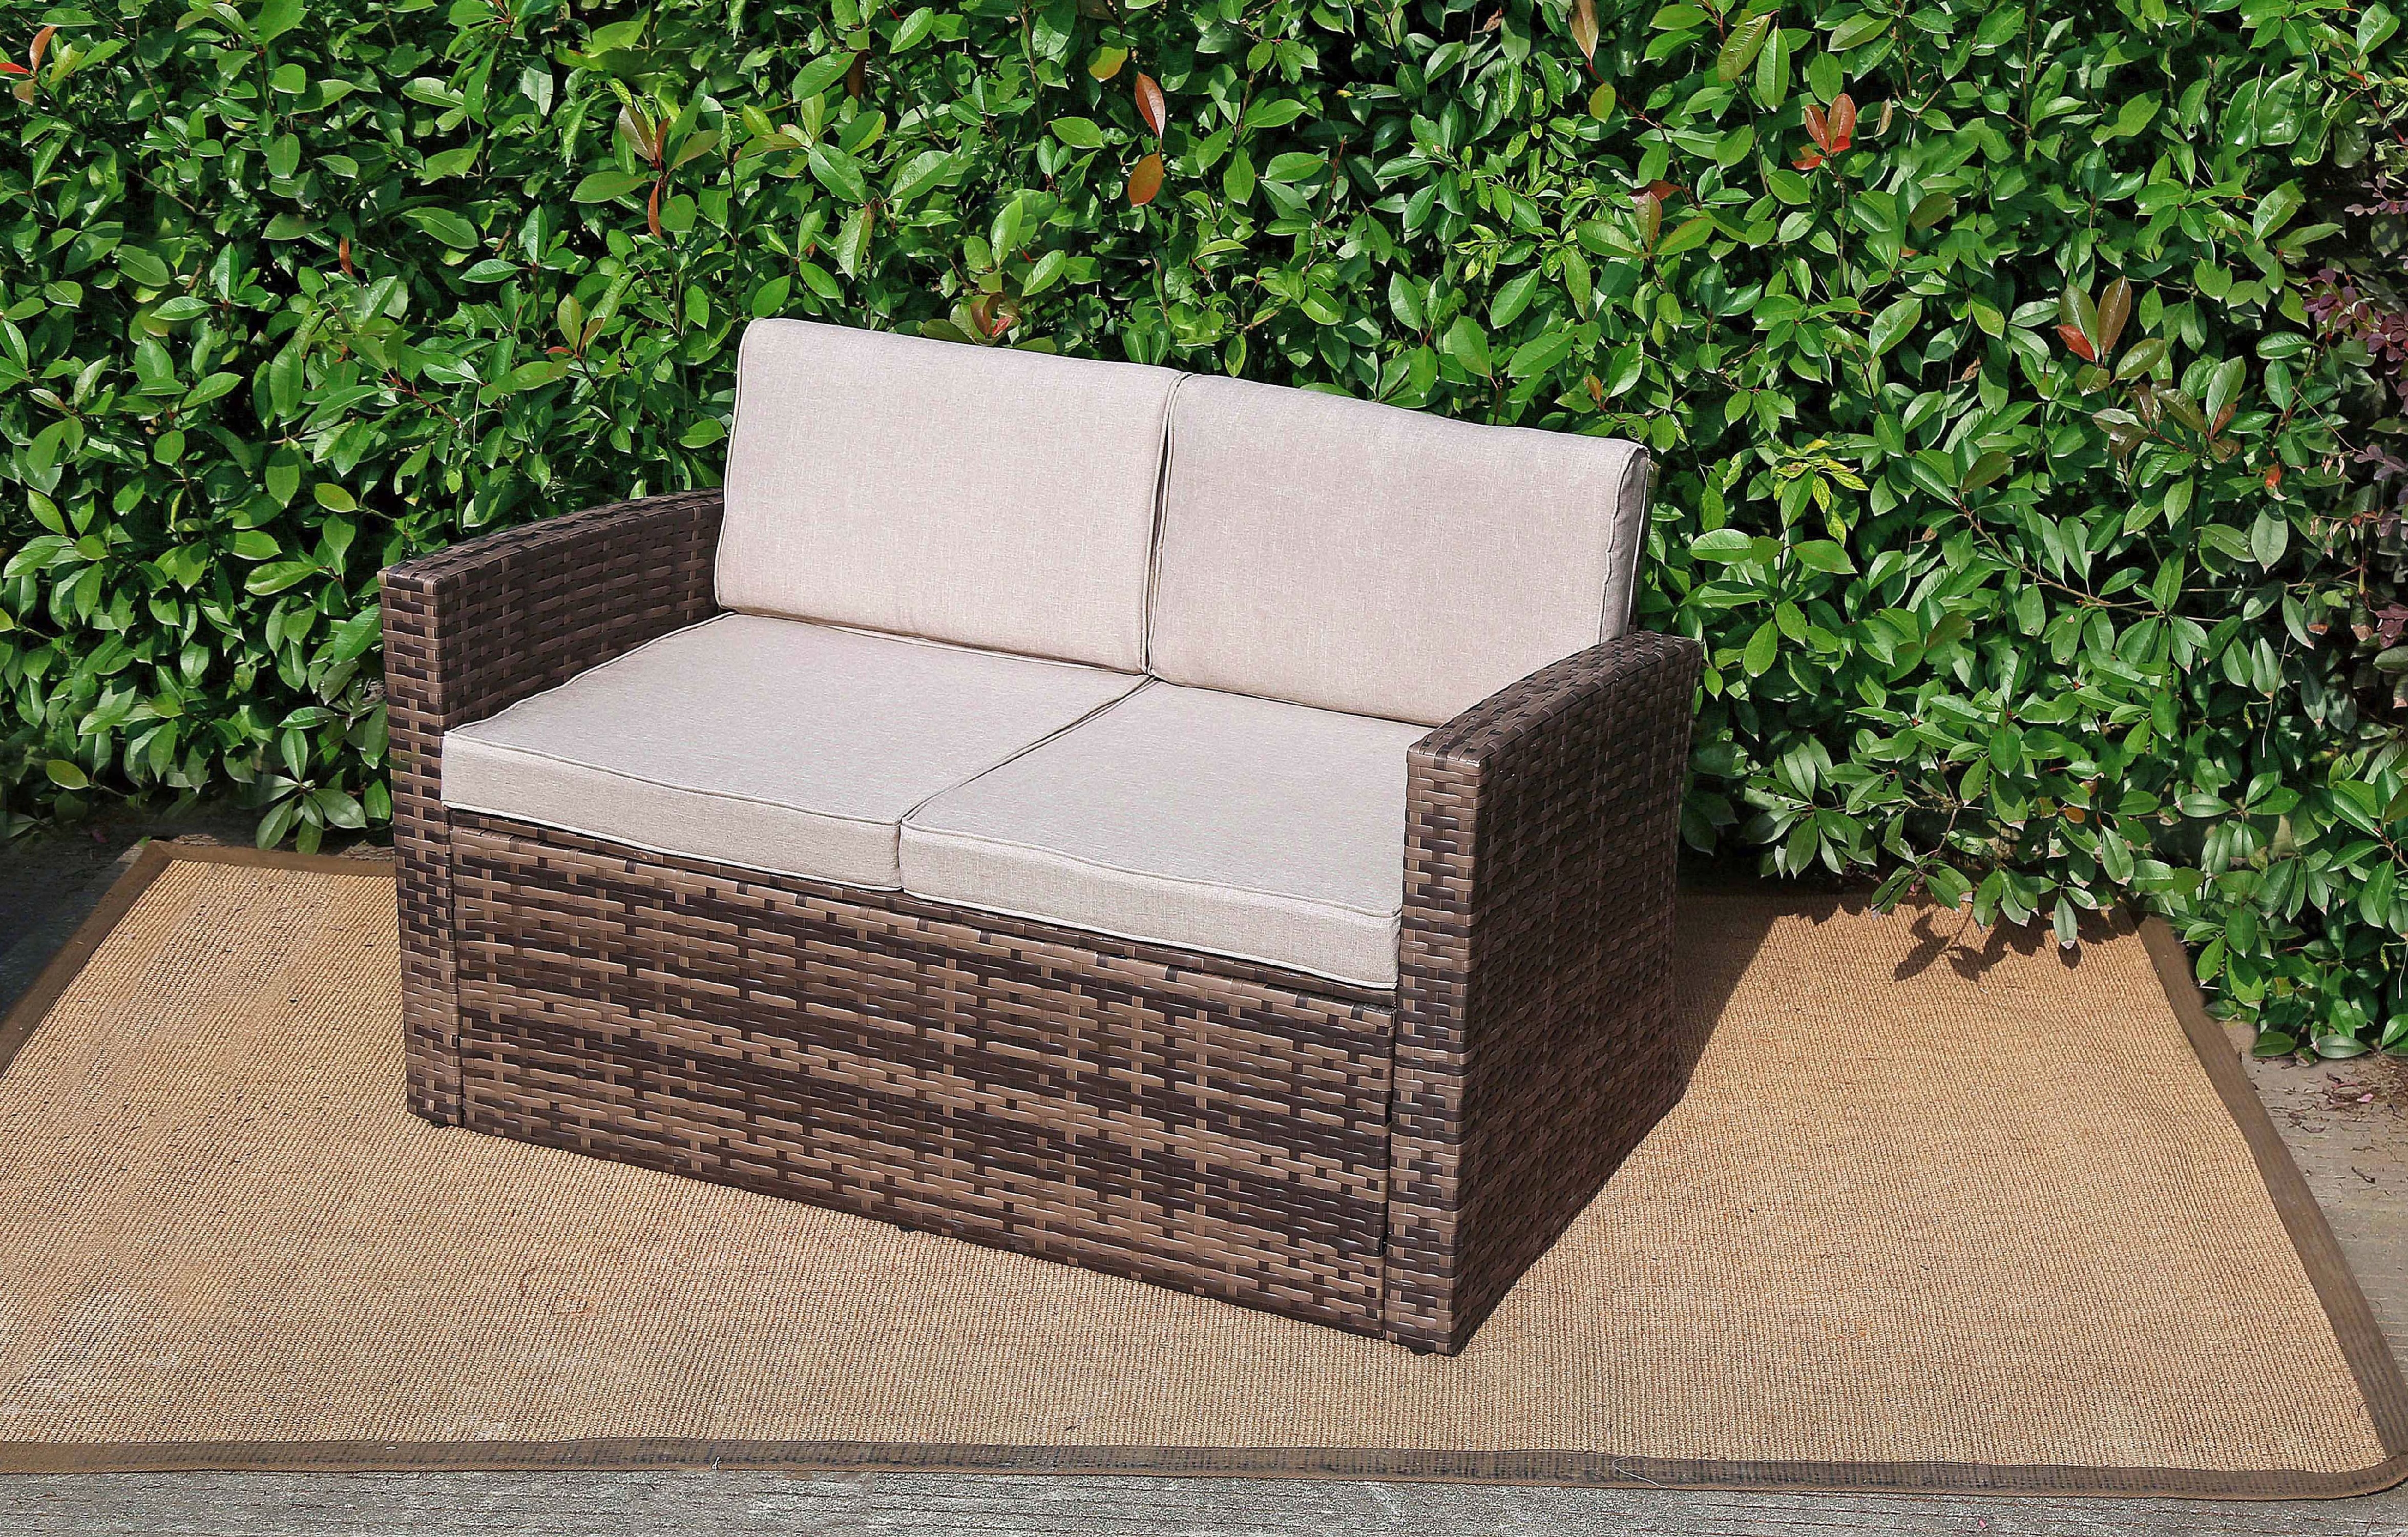 Baner Garden A102 Outdoor Rattan Pool Garden Loveseat with Cushions - image 1 of 2